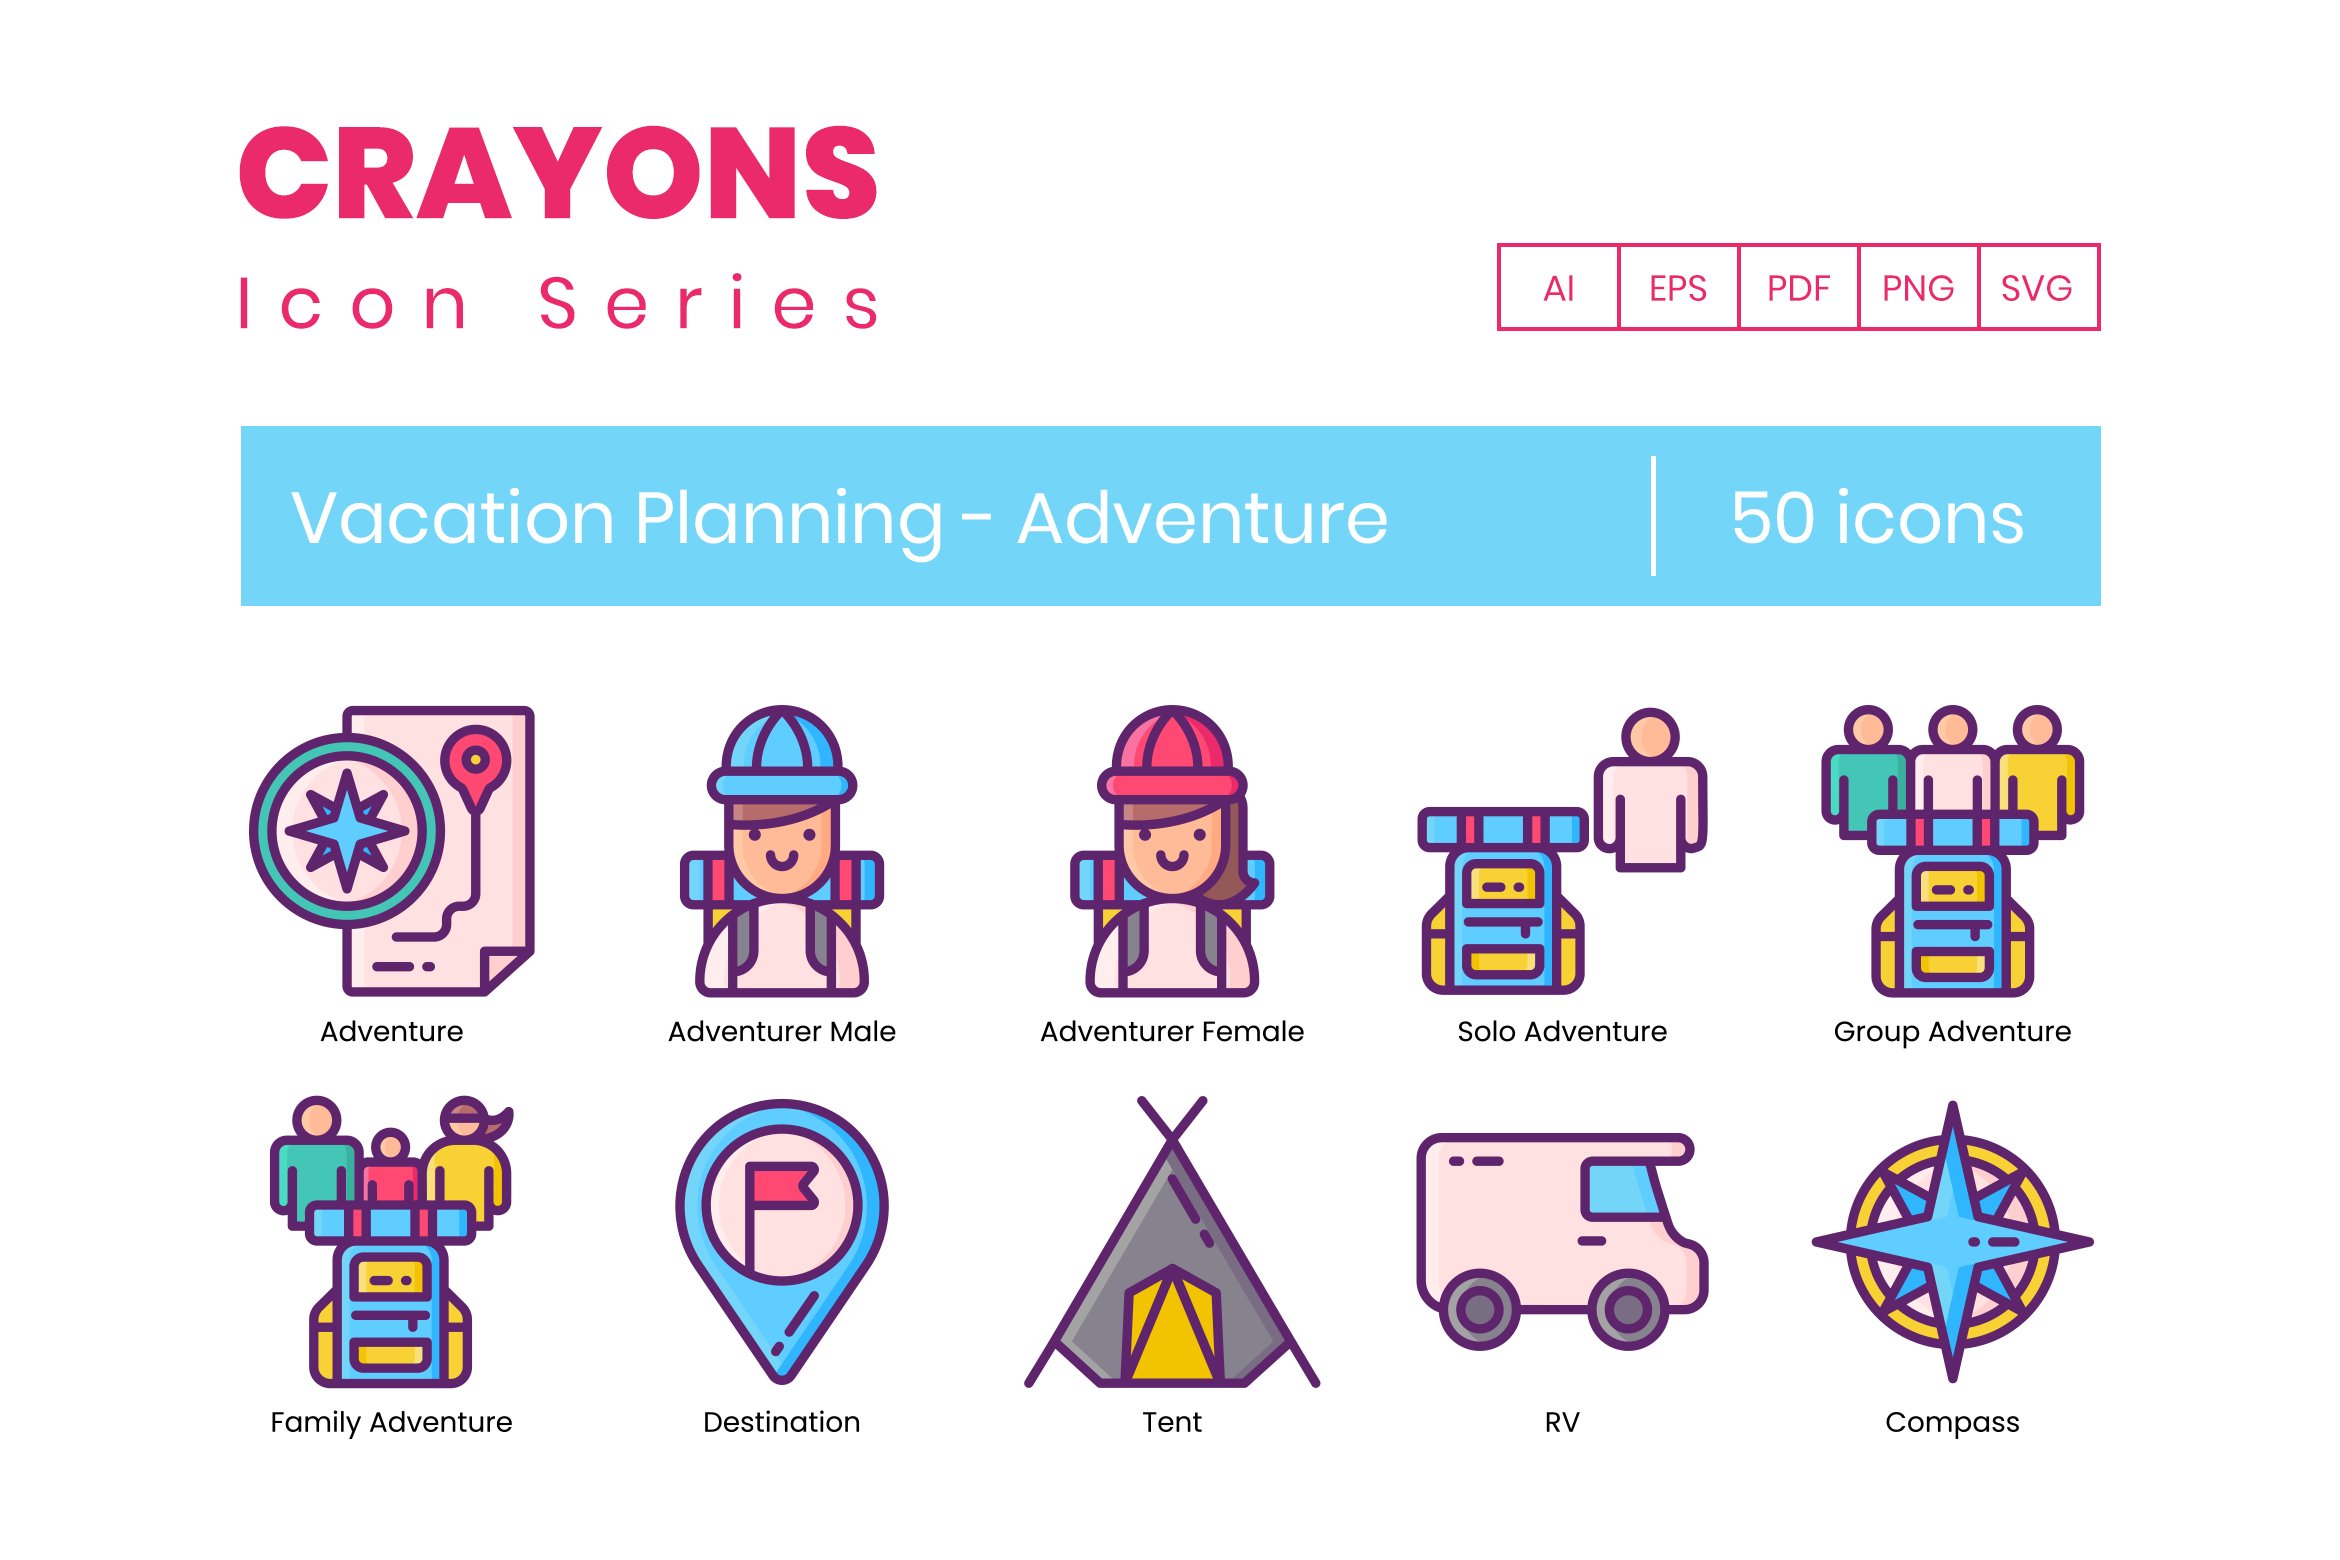 Vacation Planning - Adventure Icons cover image.